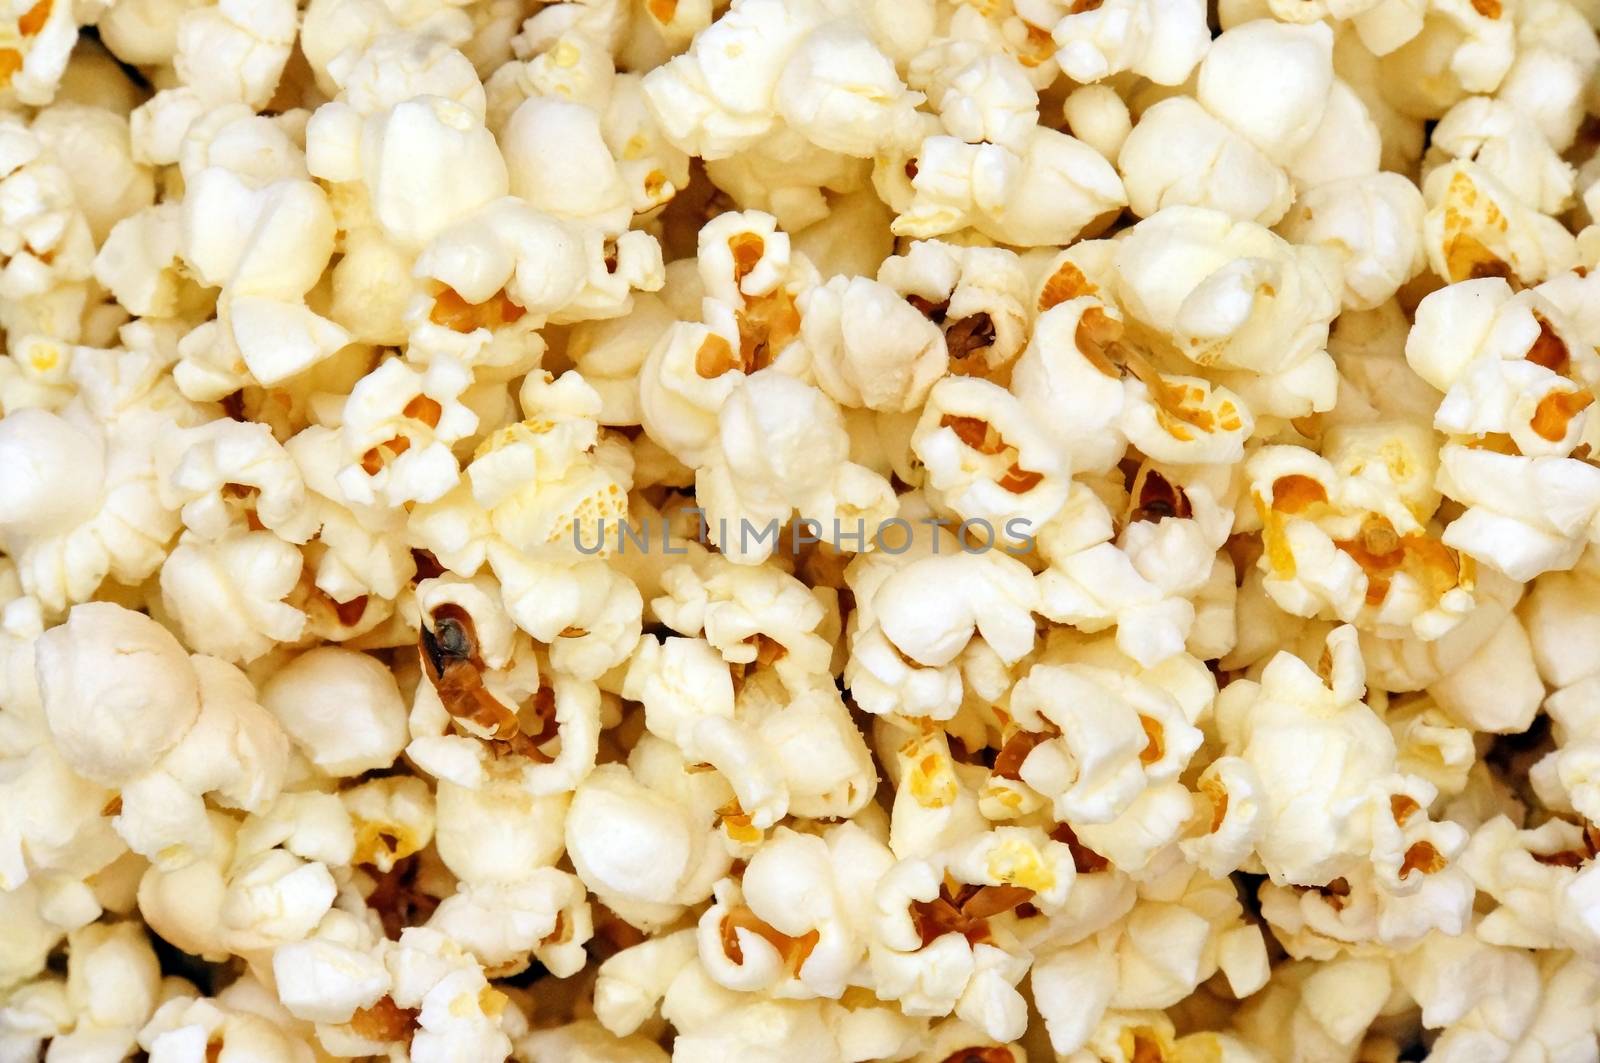 
Popcorn close up as a background